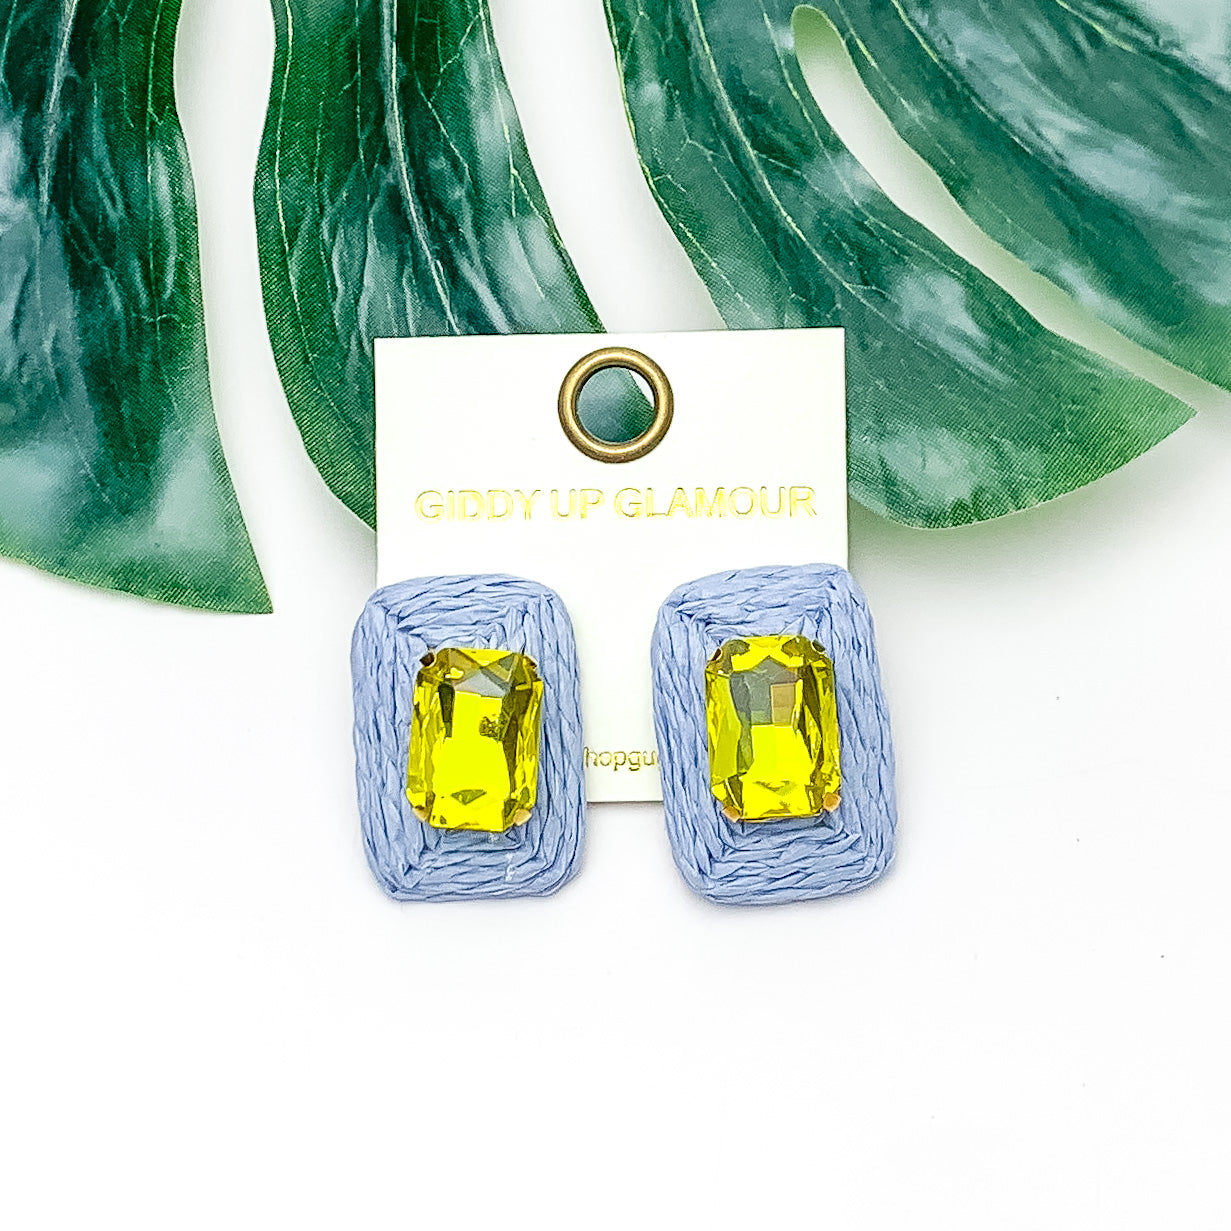 Truly Tropical Raffia Rectangle Earrings in Periwinkle Blue With Yellow Crystal. Pictured on a white background with the earrings laying on a large leaf.